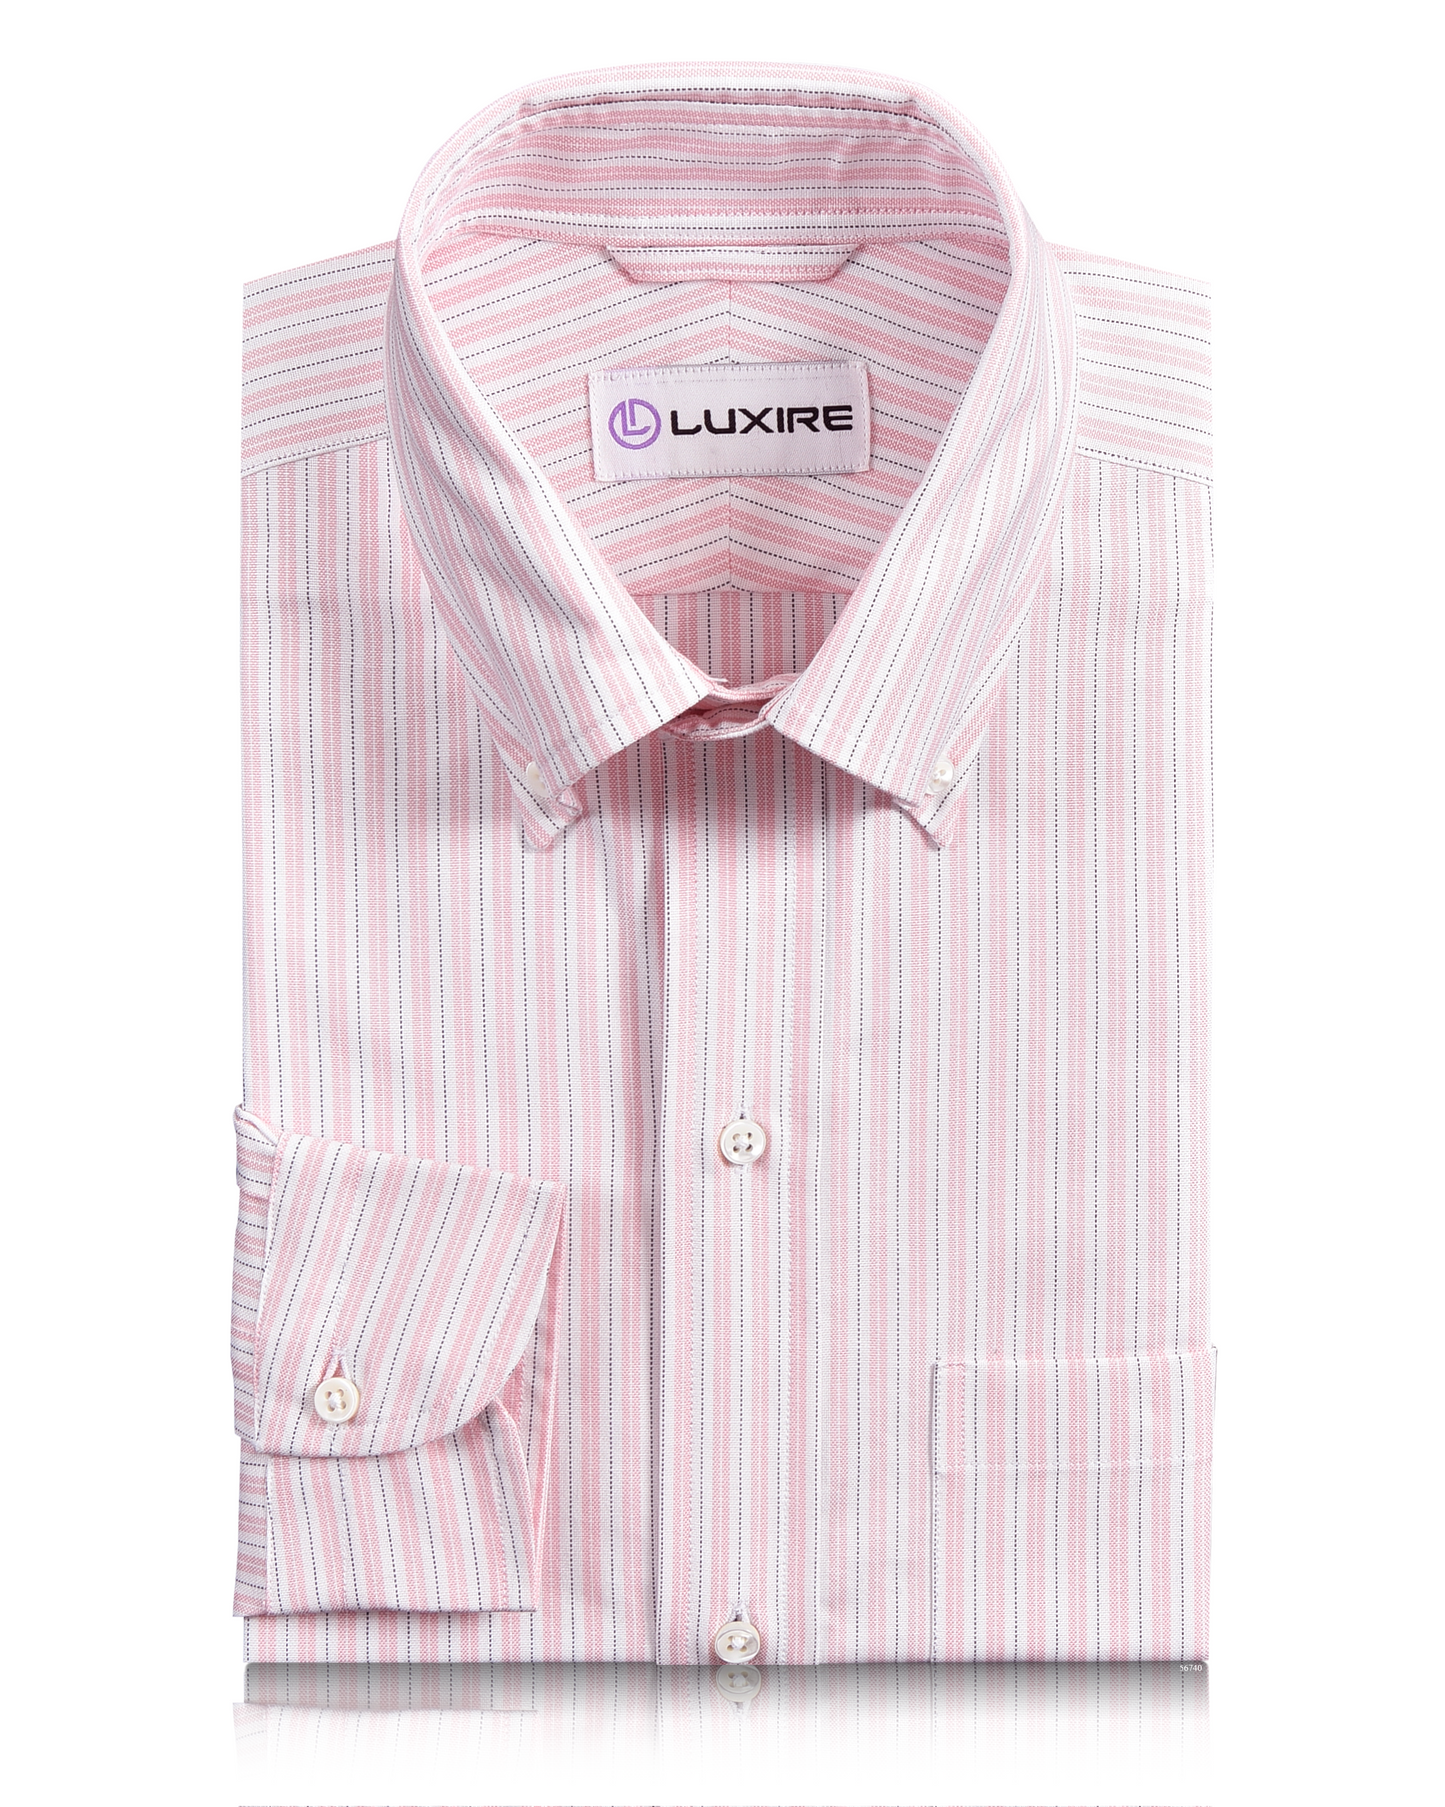 Alumo Oxford Soft Pink and Navy Alternate Stripes